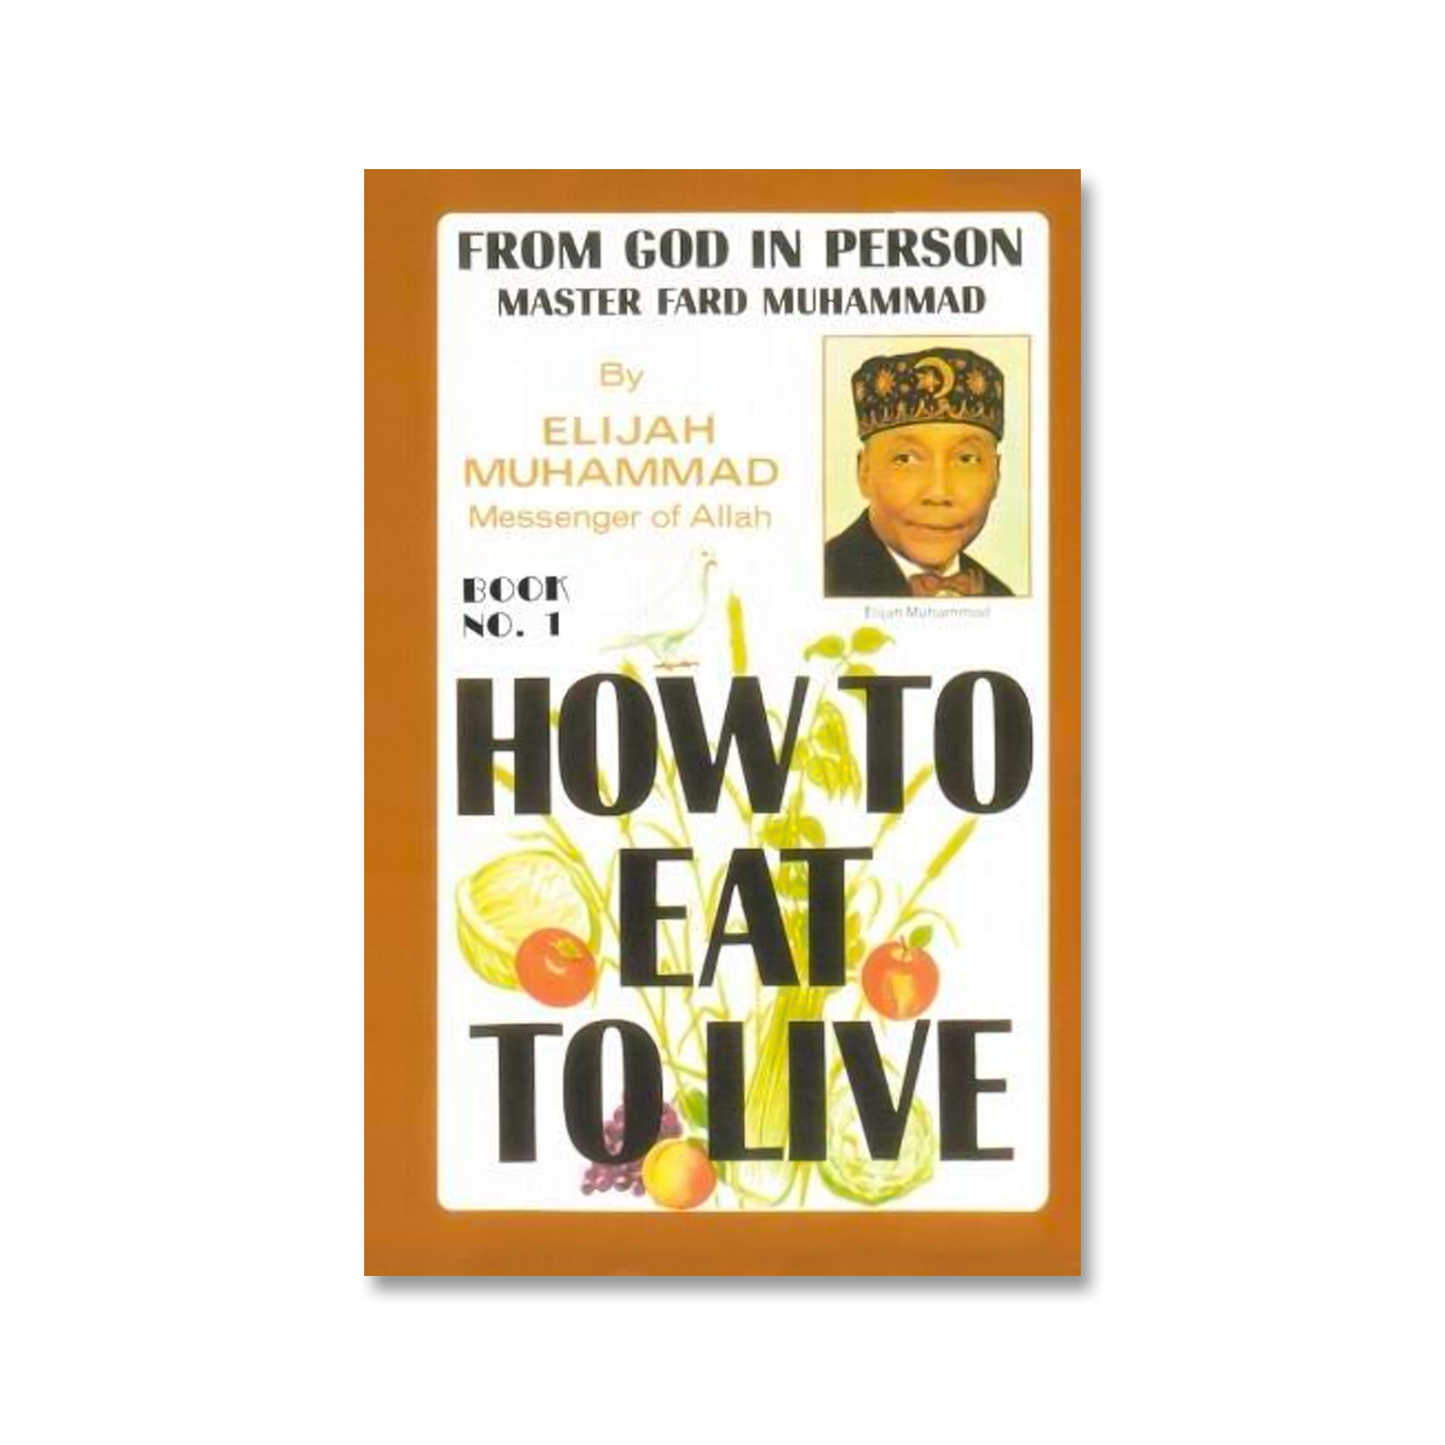 HOW TO EAT TO LIVE - BOOK ONE: From God In Person, Master Fard Muhammad